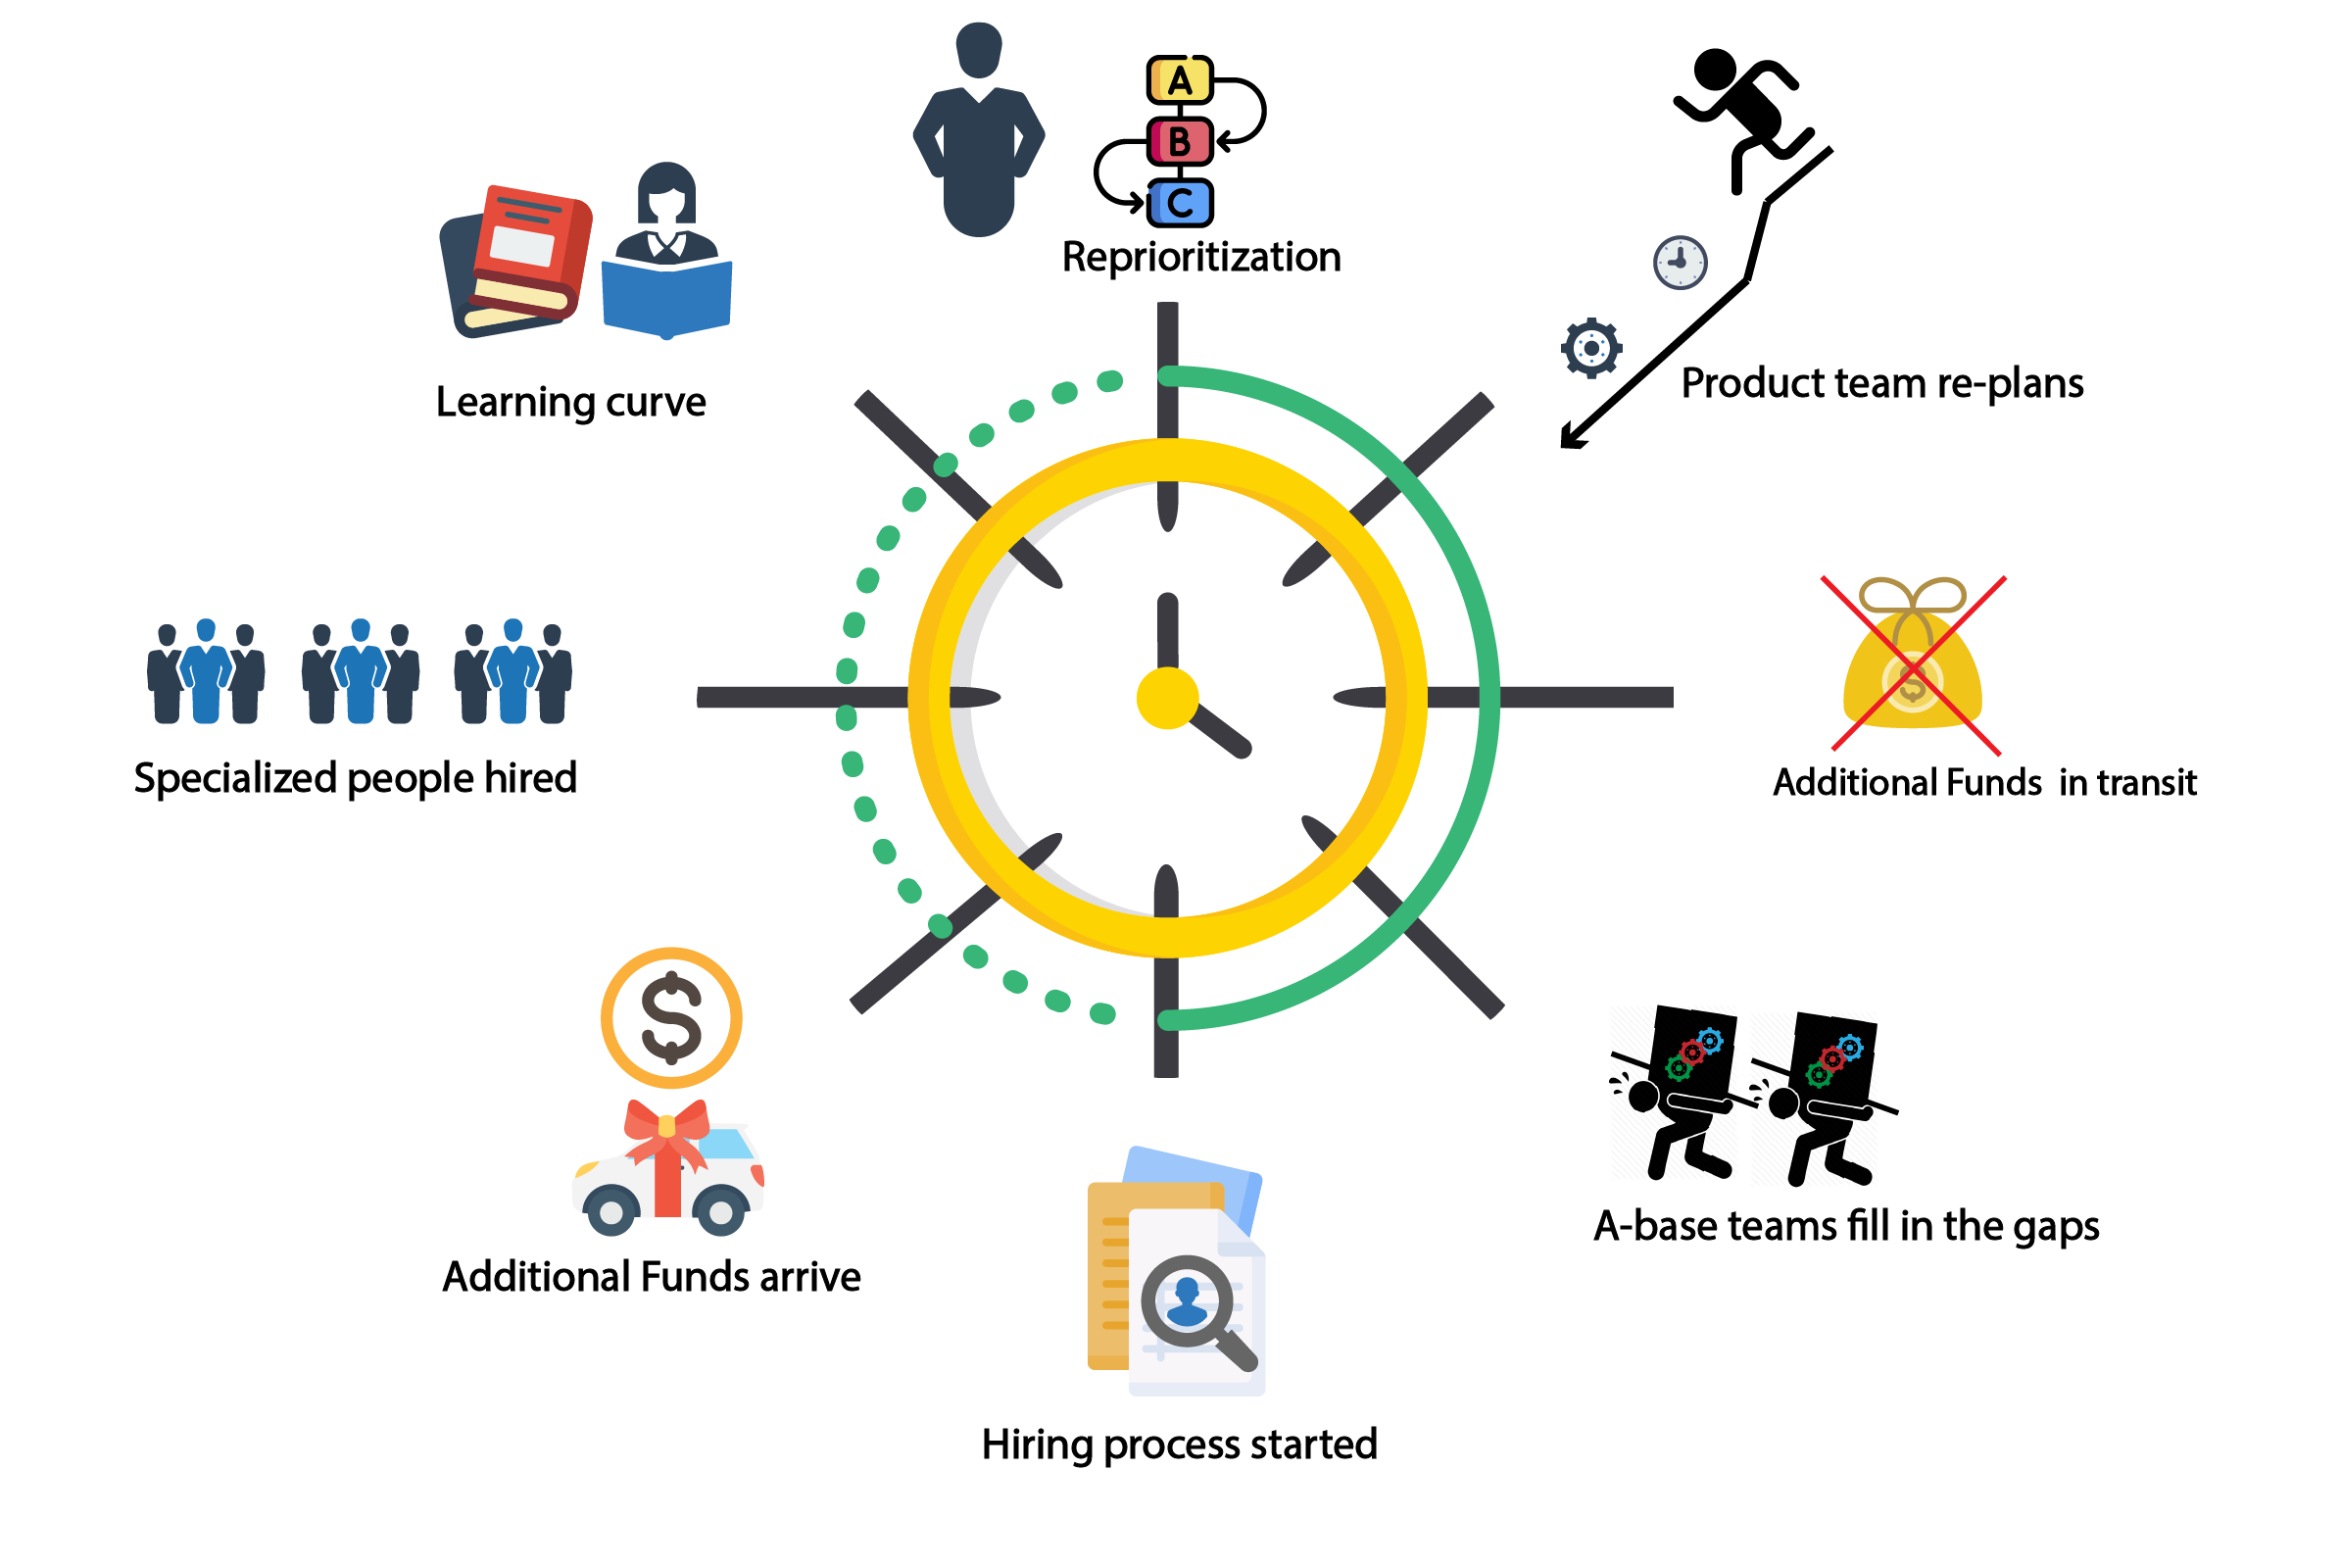 This image depicts the effects of re-prioritization has on IT teams. It shows a clock-like circle image with, at each 7.5 min interval, a different image. At the noon position, it's the re-prioritization activity. At the 7.5 min, an image shows planning is re-done, at 15min, an image shows that funds are in transit and not yet available, at 22.5 min, an image shows 2 people carrying heavy boxes, at 30 min, an image shows that hiring process has started, at 37.5 min, an image shows the funds have arrived, at 45 min, an image shows a group of people with the saying 'specialized people hired', and at 52.5 min an image shows a person with a series of book with the saying 'learning curve'.